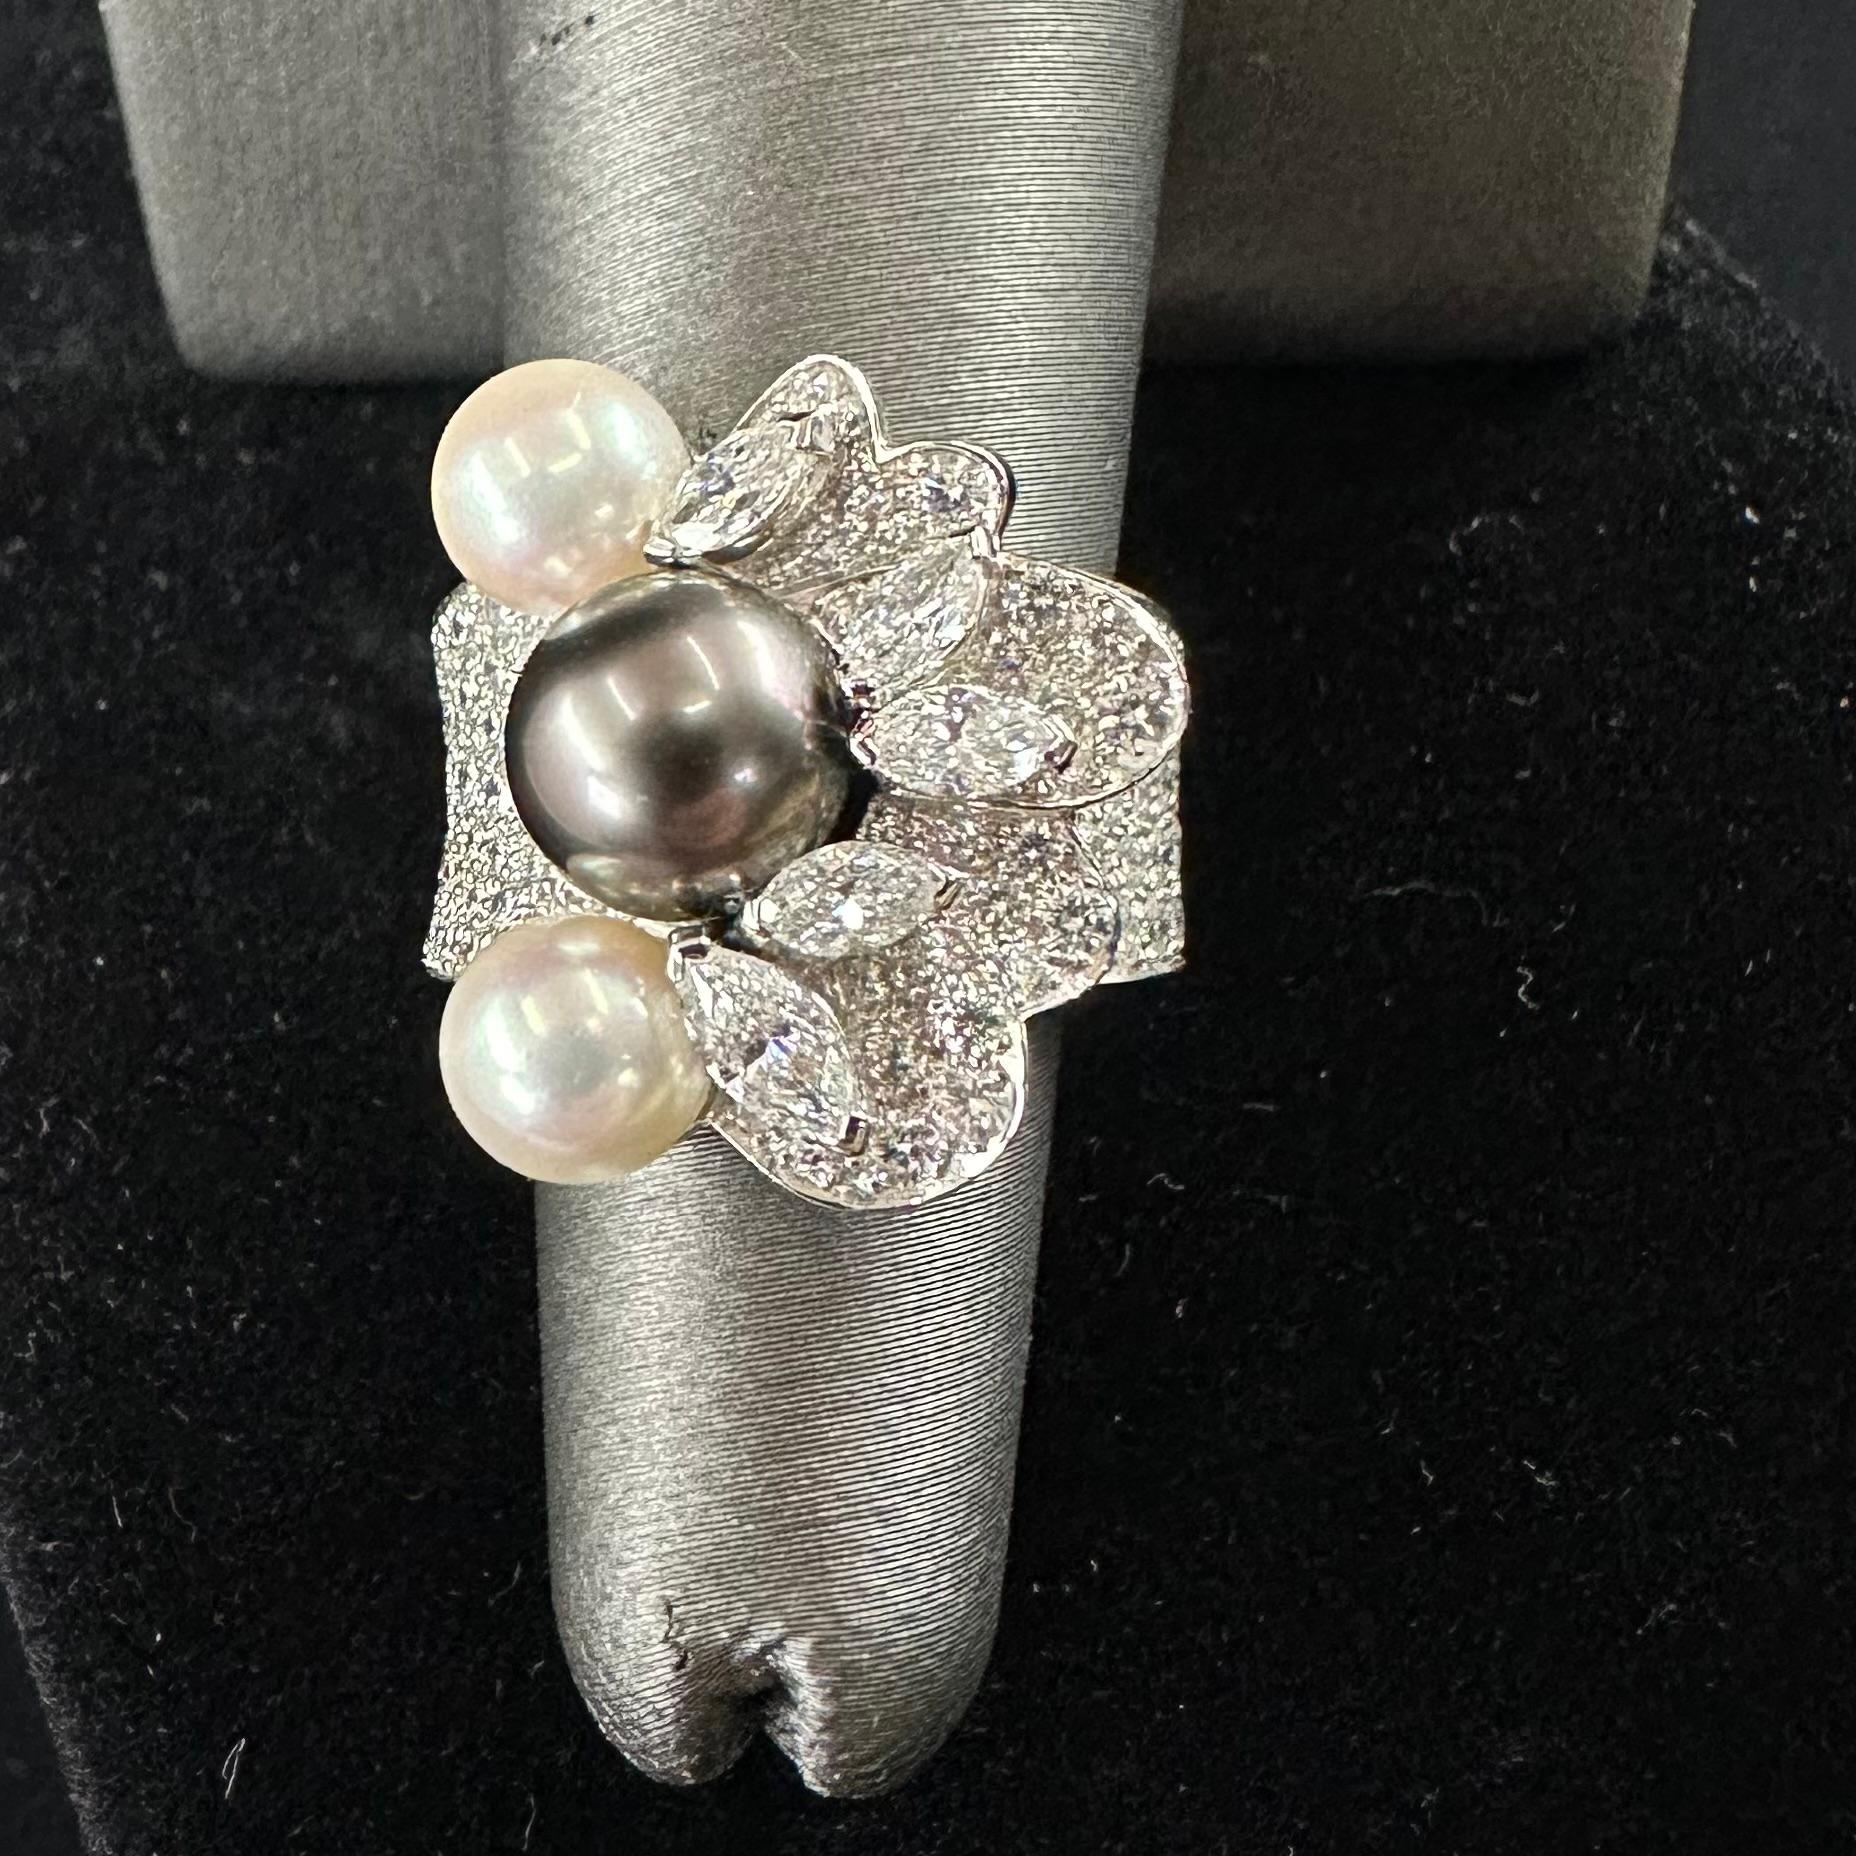 Van Cleef & Arpels
Three Akoya pearls, two cream color, and one black color pearl 8.5 mm and 6.5 mm Pearls. 
Ring size 51 or 5.5 US
Width at top of the ring 20 mm and  tapering down to 7mm. 
Estimated diamond weight 4.25 carats total comprised of